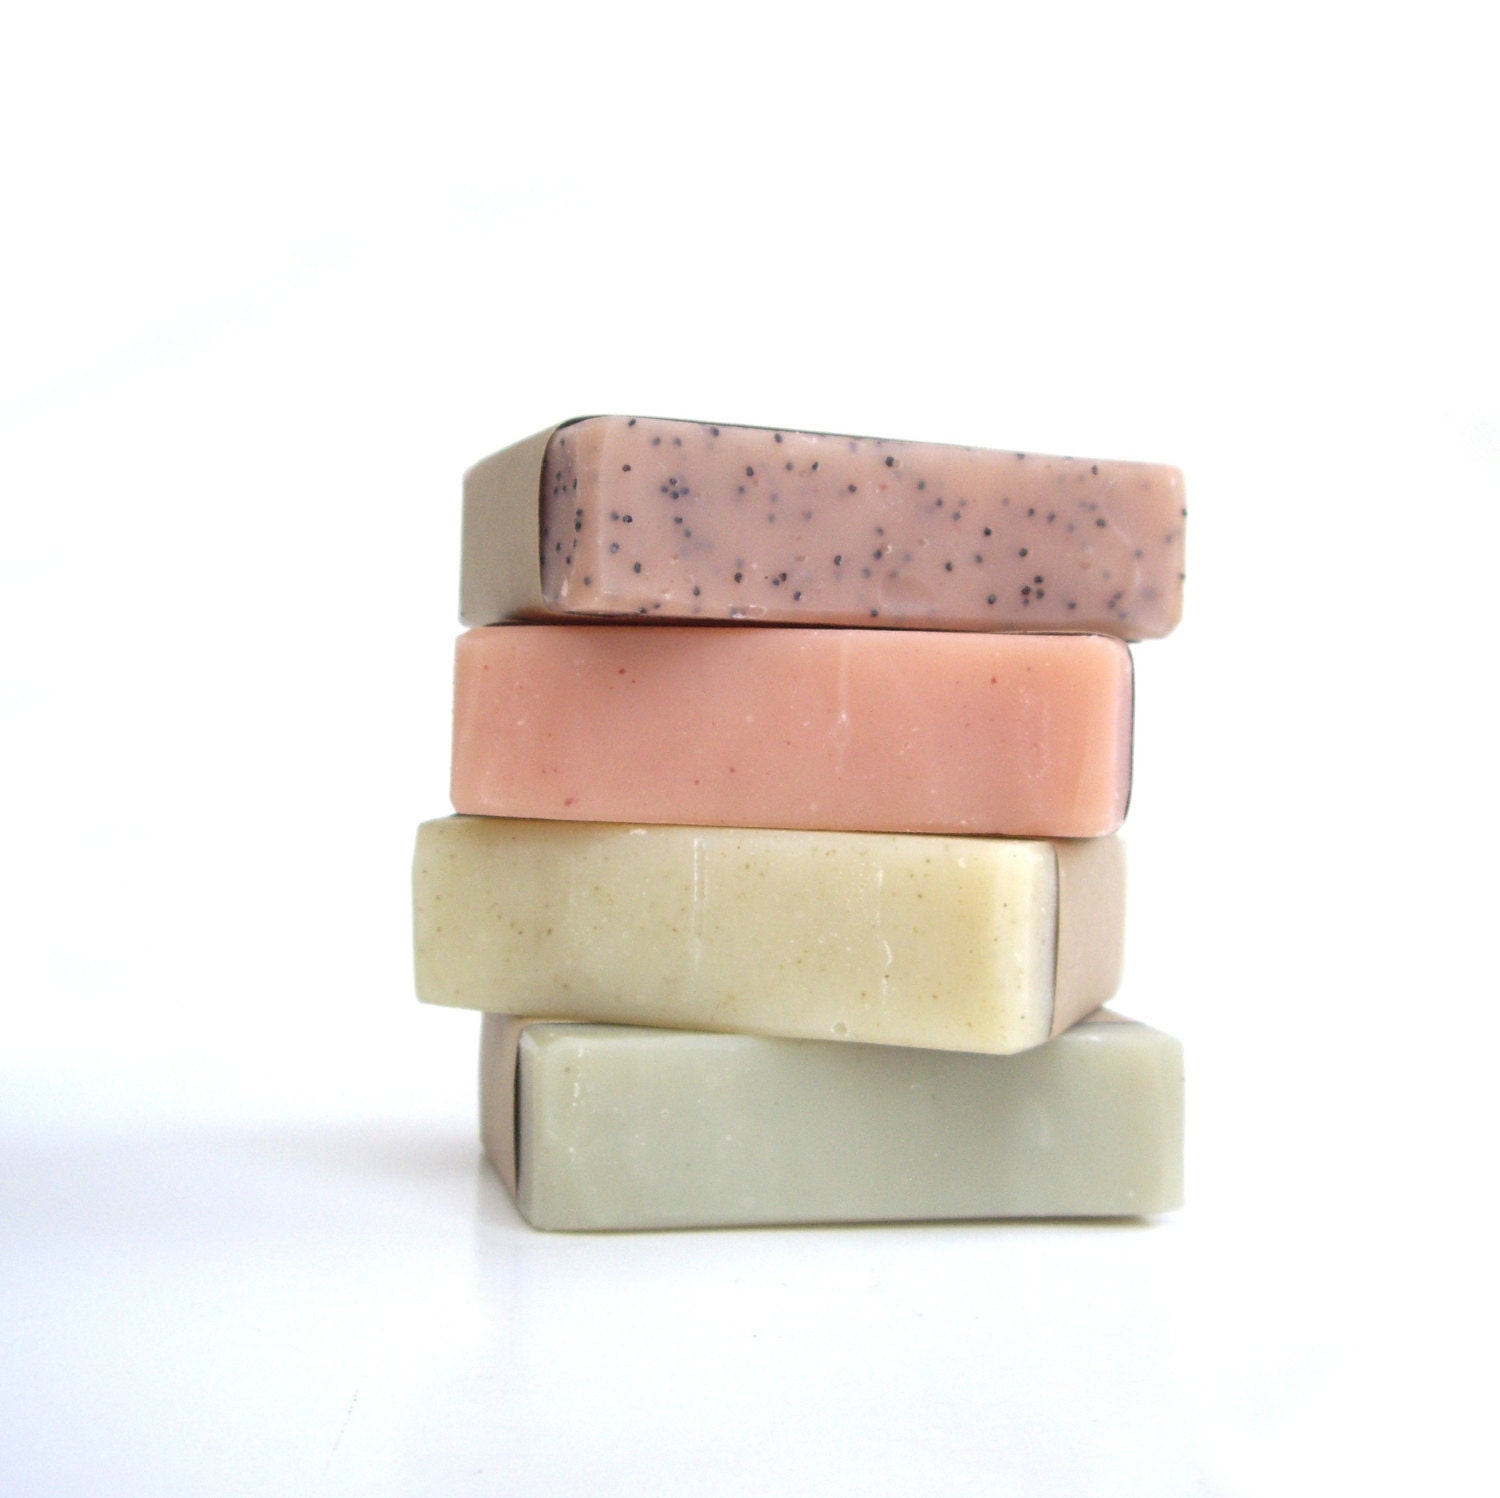 Soap set - women gift set, Natural soap, unscented soap, vegan soap, Valentines Day Gift. - RightSoap